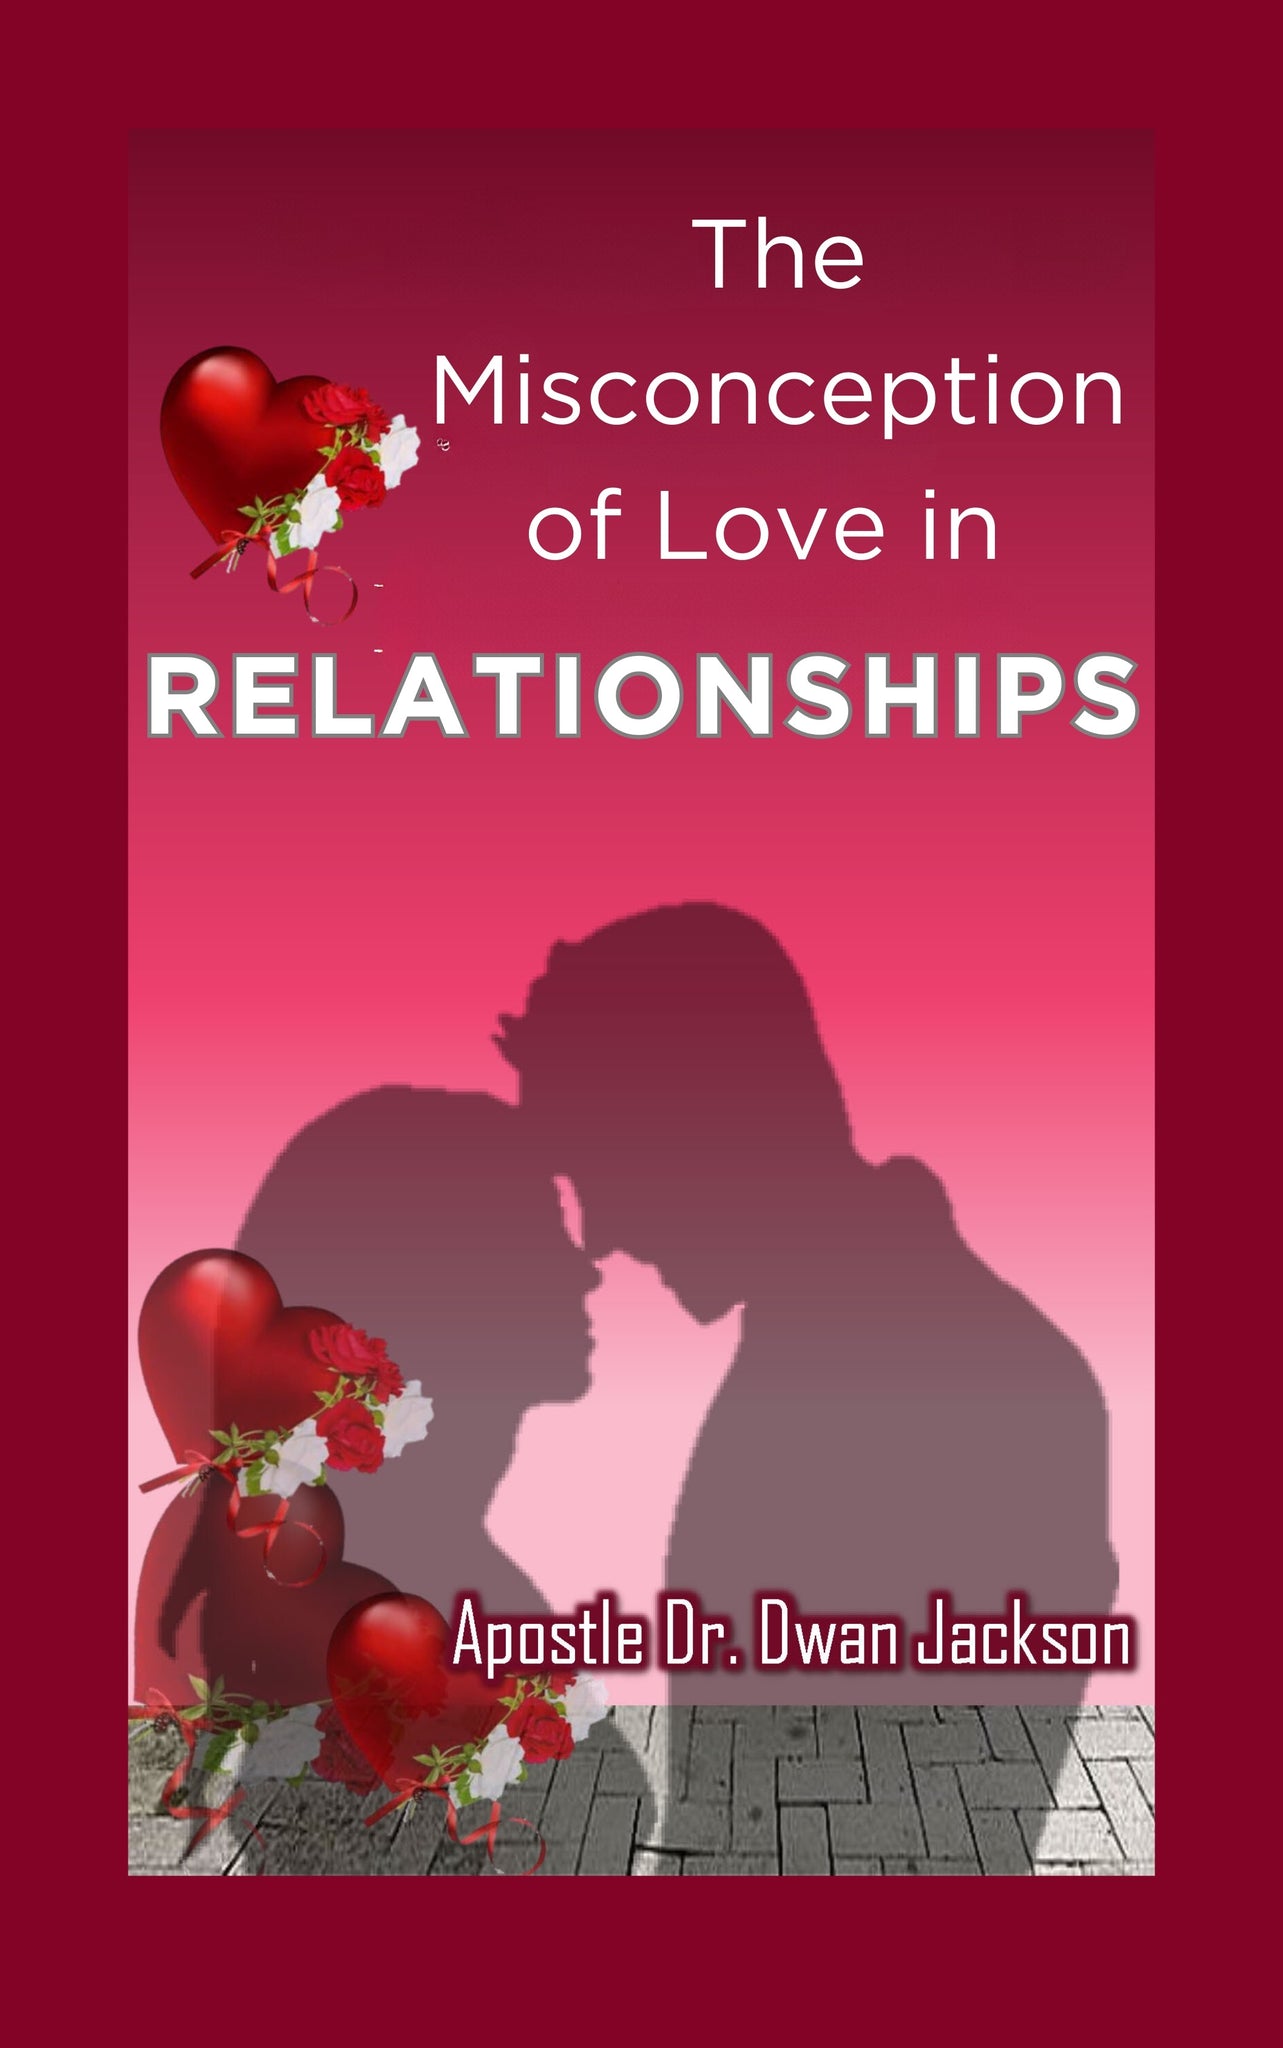 The Misconception of Love in Relationships